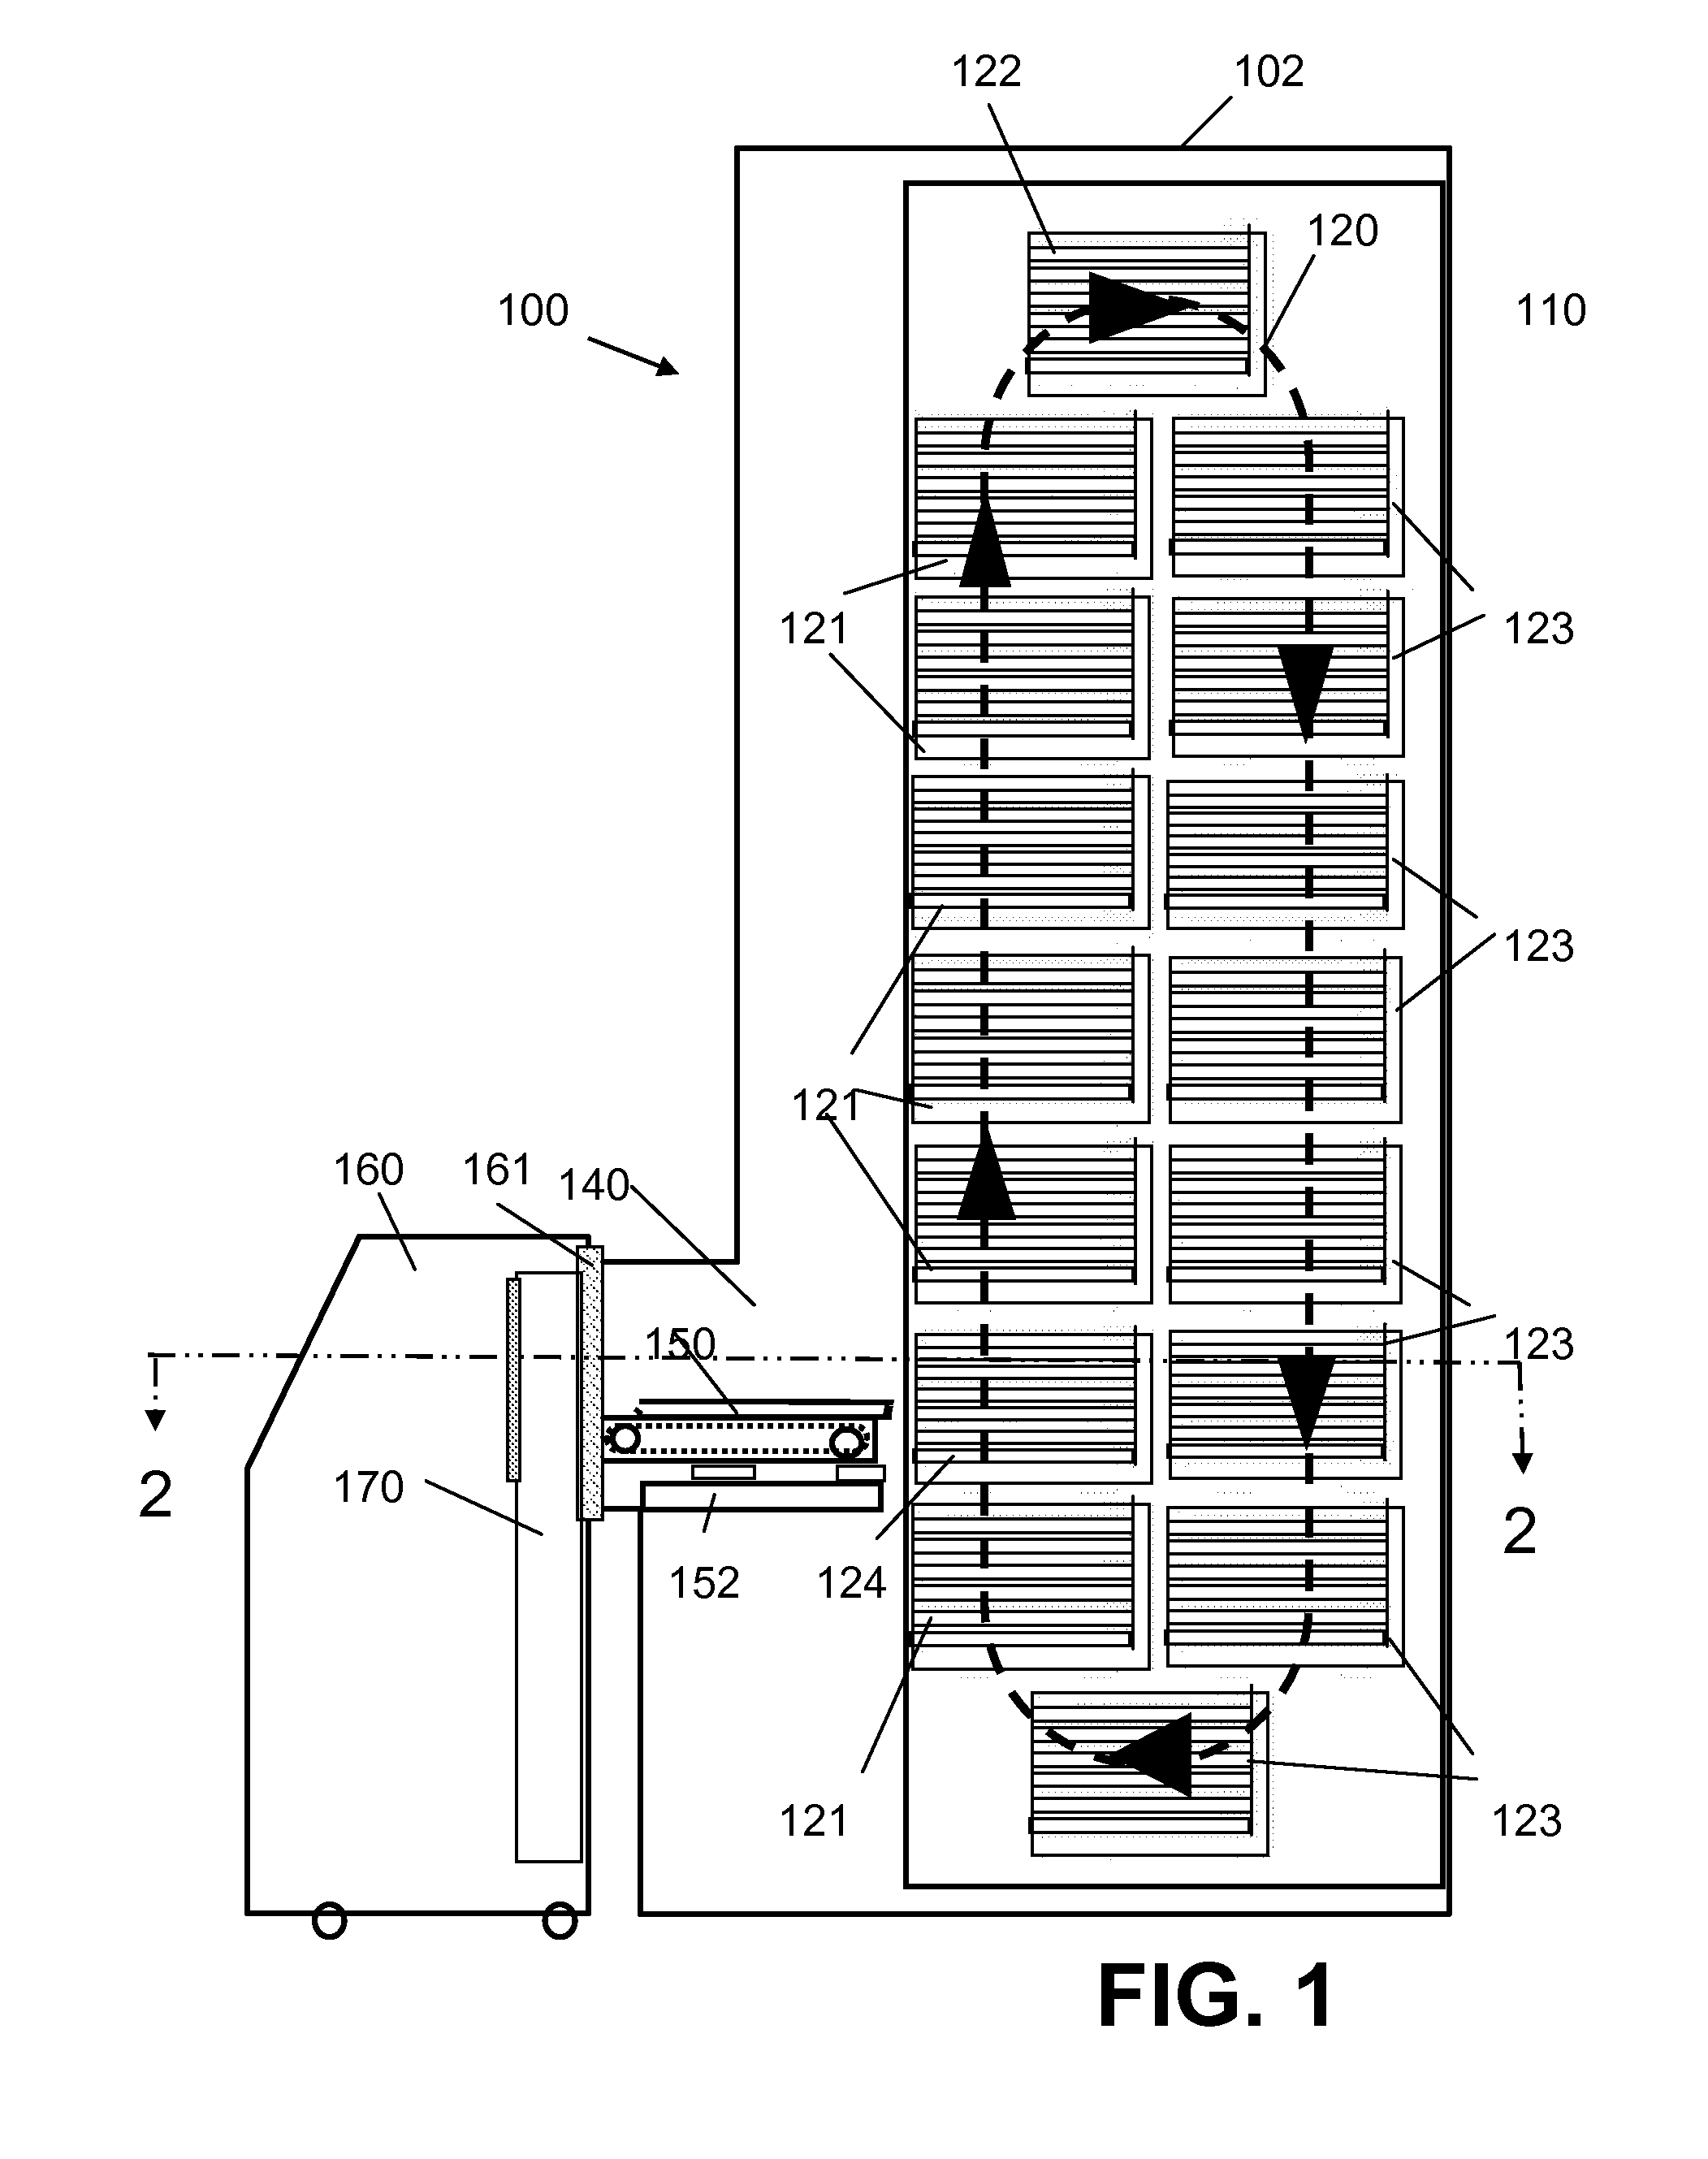 Automated system for storing, retrieving and managing sample